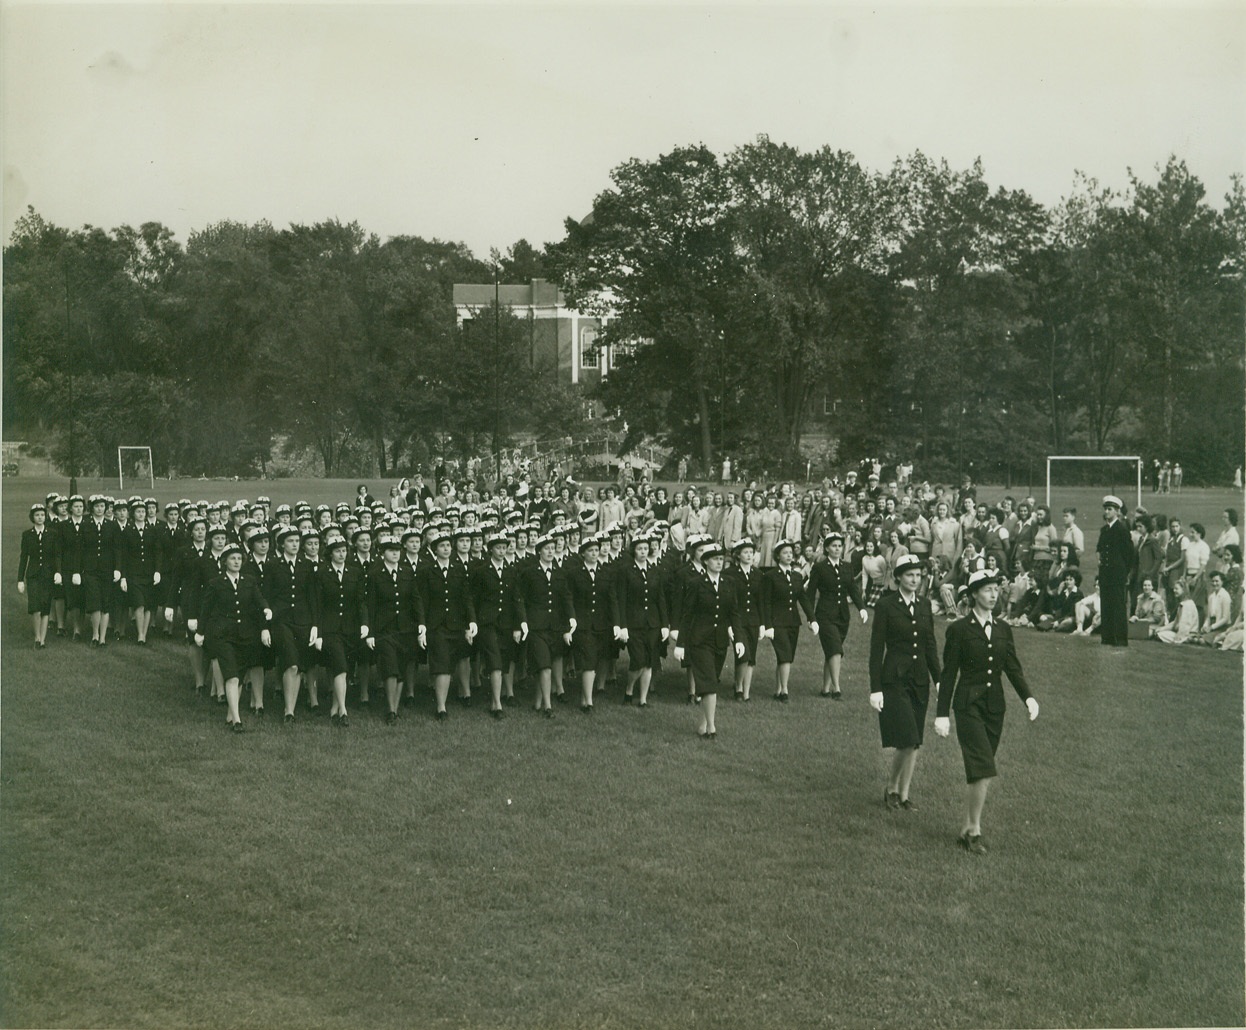 THE WAVES ON DRESS PARADE FOR FIRST TIME, 9/24/1942. NORTHAMPTON, MASS. – The WAVES held their first dress parade and review here today on the campus of Smith College. Here, the WAVES hold dress parade as the students of Smith College in the background watch. Credit: OWI Radiophoto from ACME;